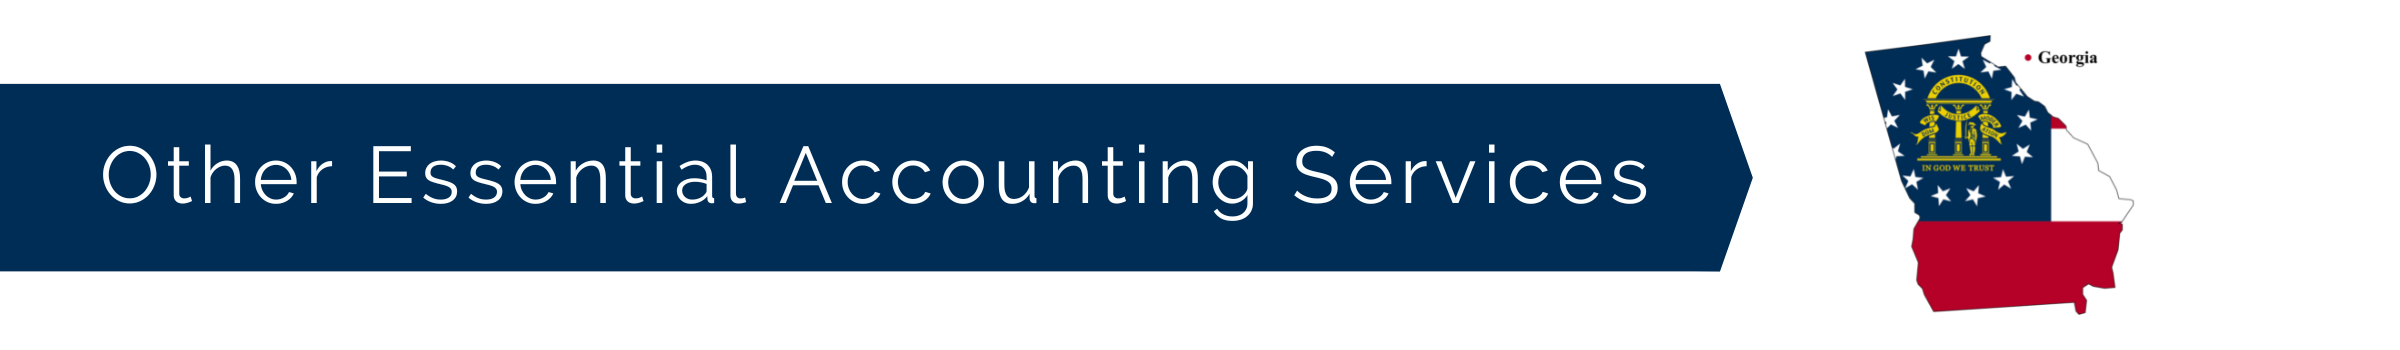 Accounting-services